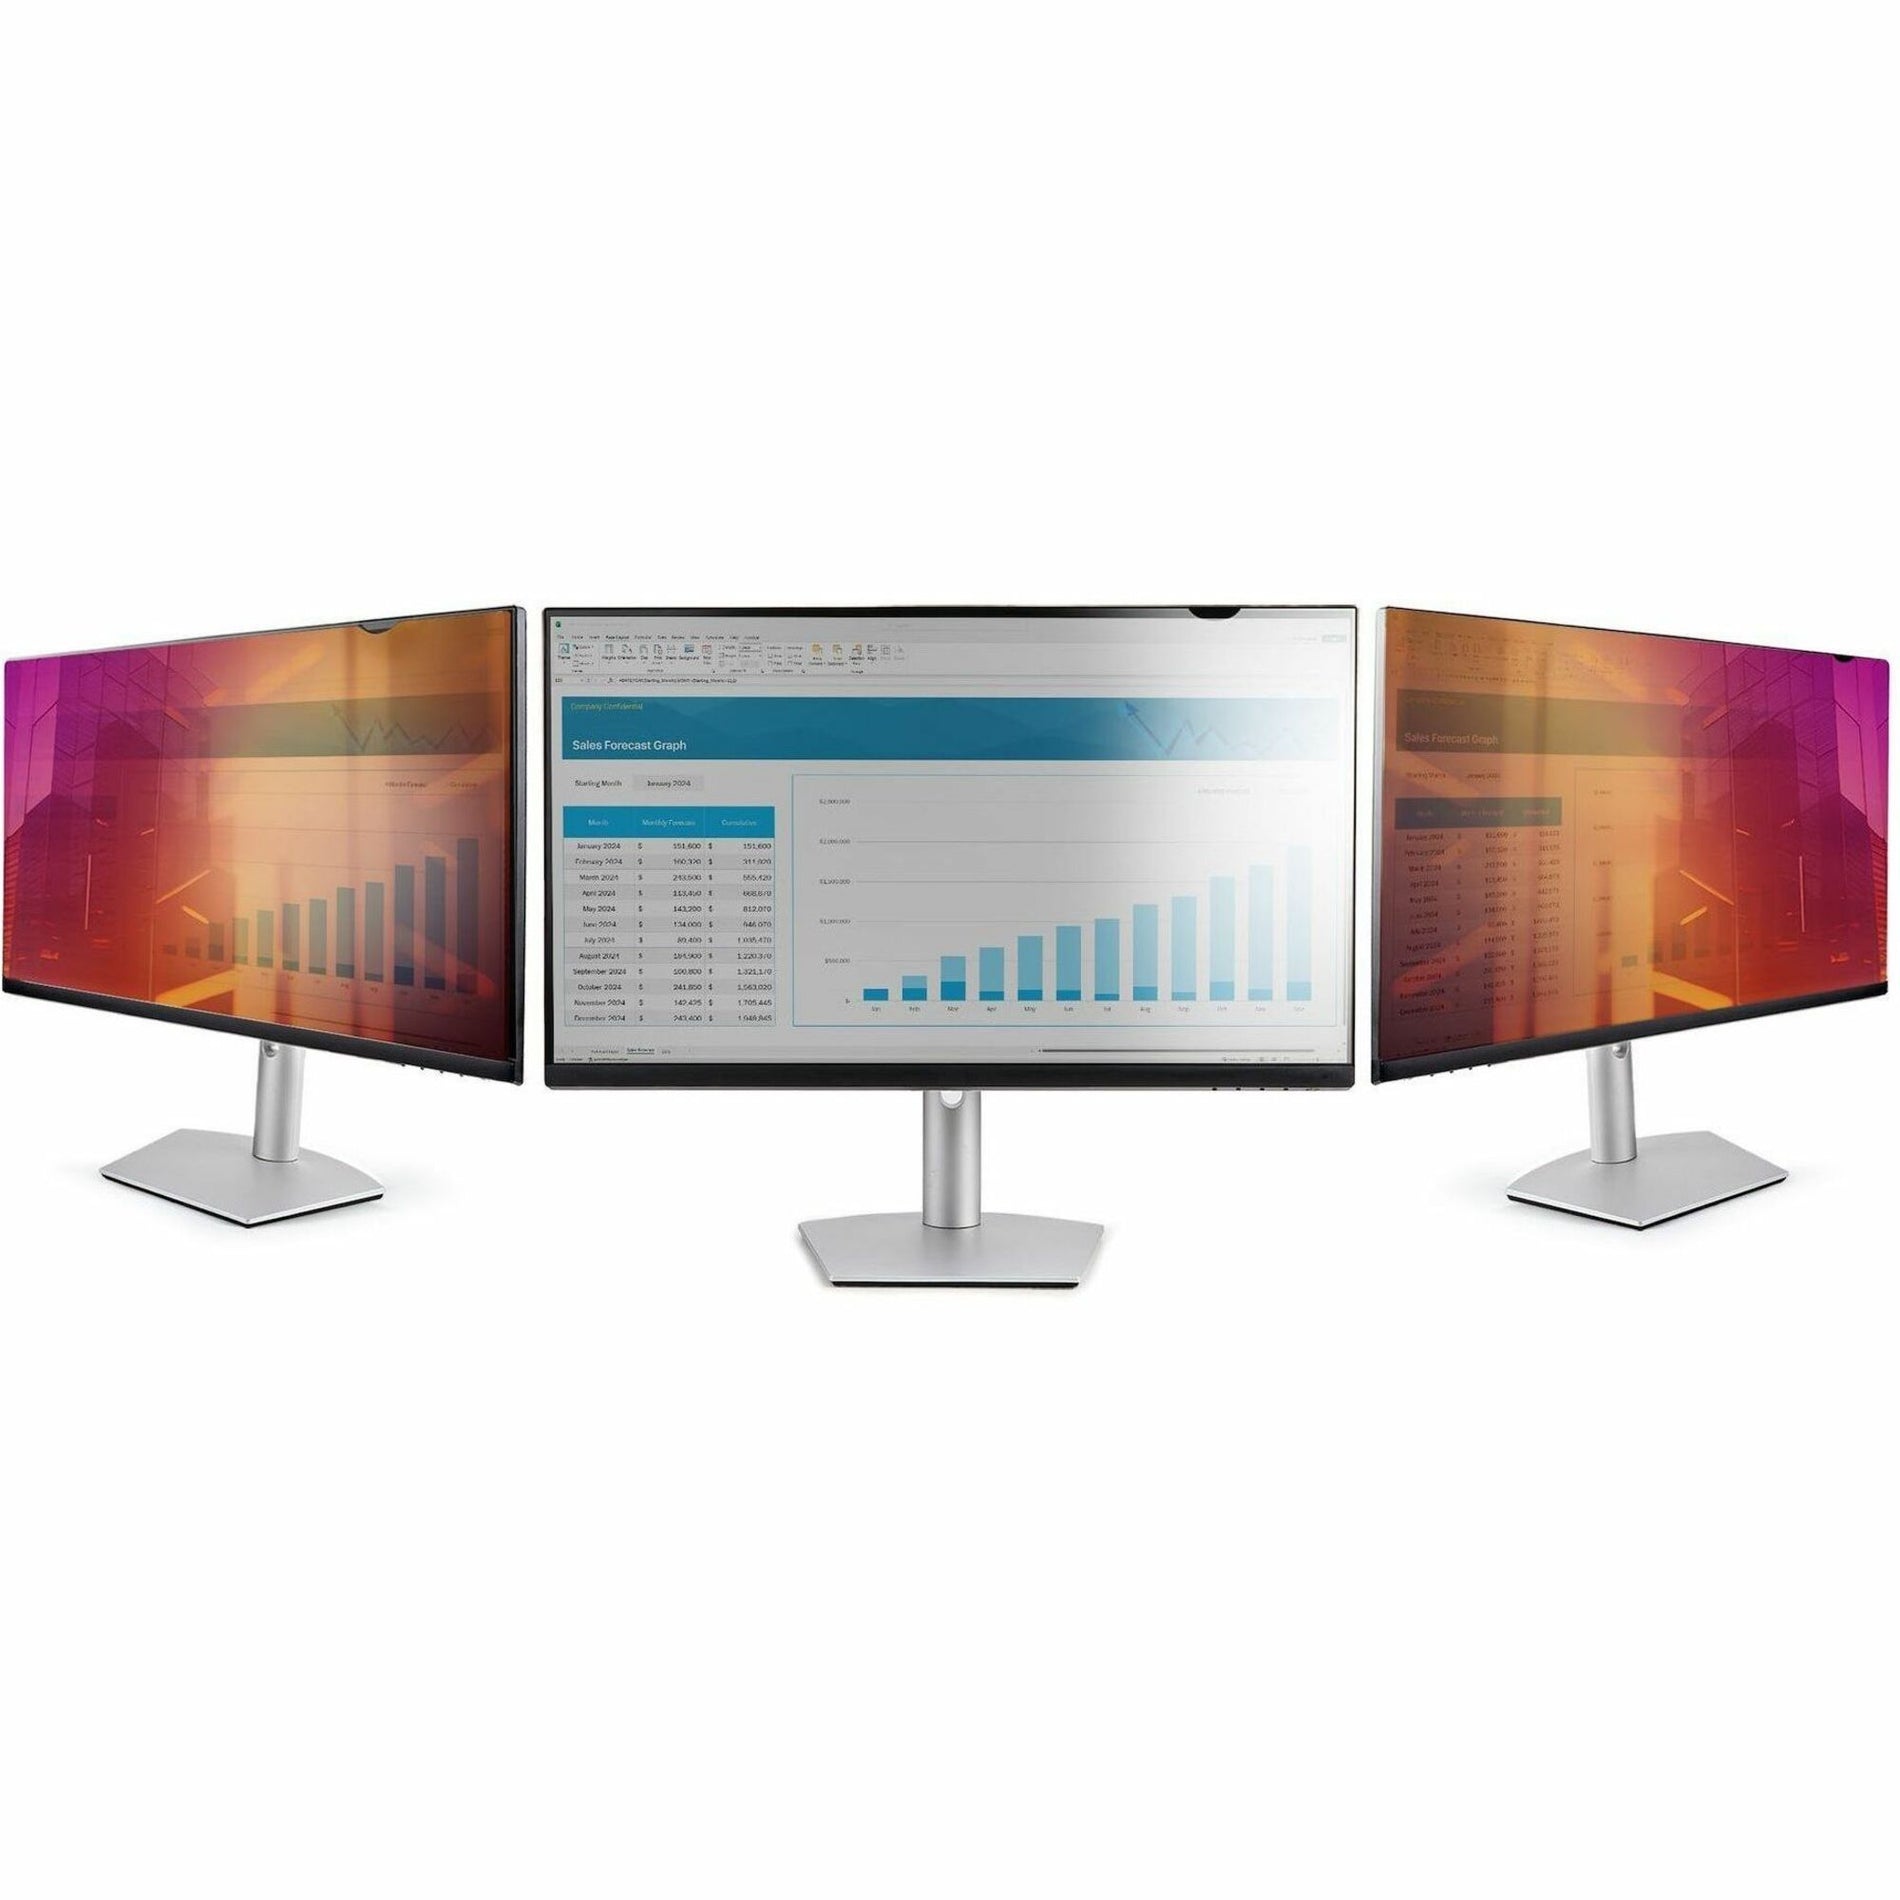 StarTech.com 2769G-PRIVACY-SCREEN Privacy Screen Filter, Limited Viewing Angle, Eyesight Protection, Removable, Residue-free, 27" Display Size Supported